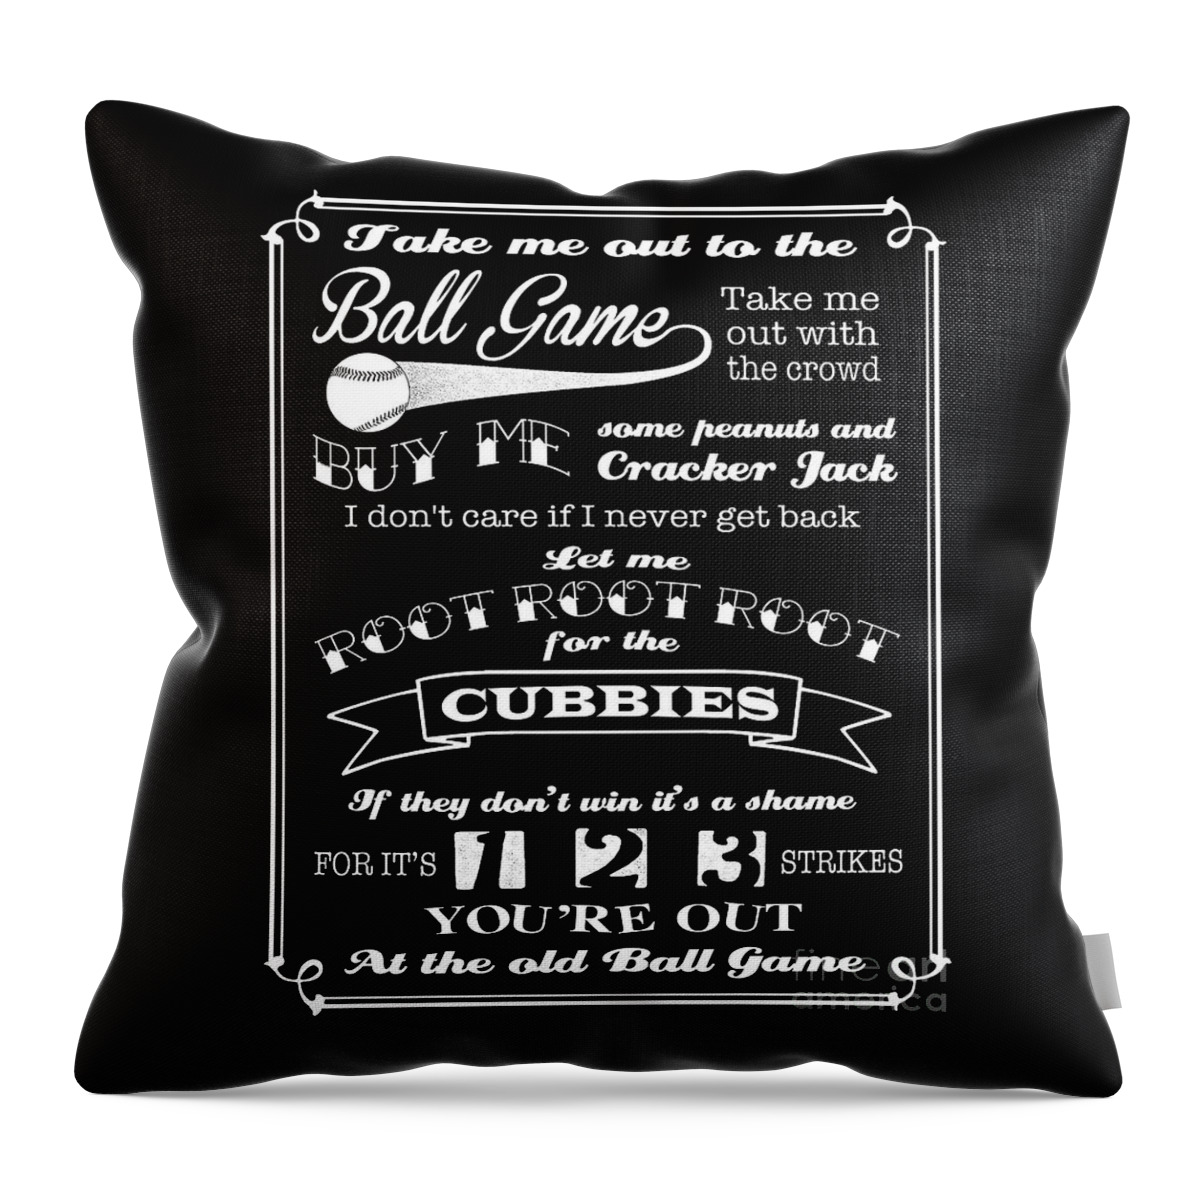 Take Me Out To The Ball Game Throw Pillow featuring the digital art Take Me Out To The Ball Game - Cubs by Ginny Gaura